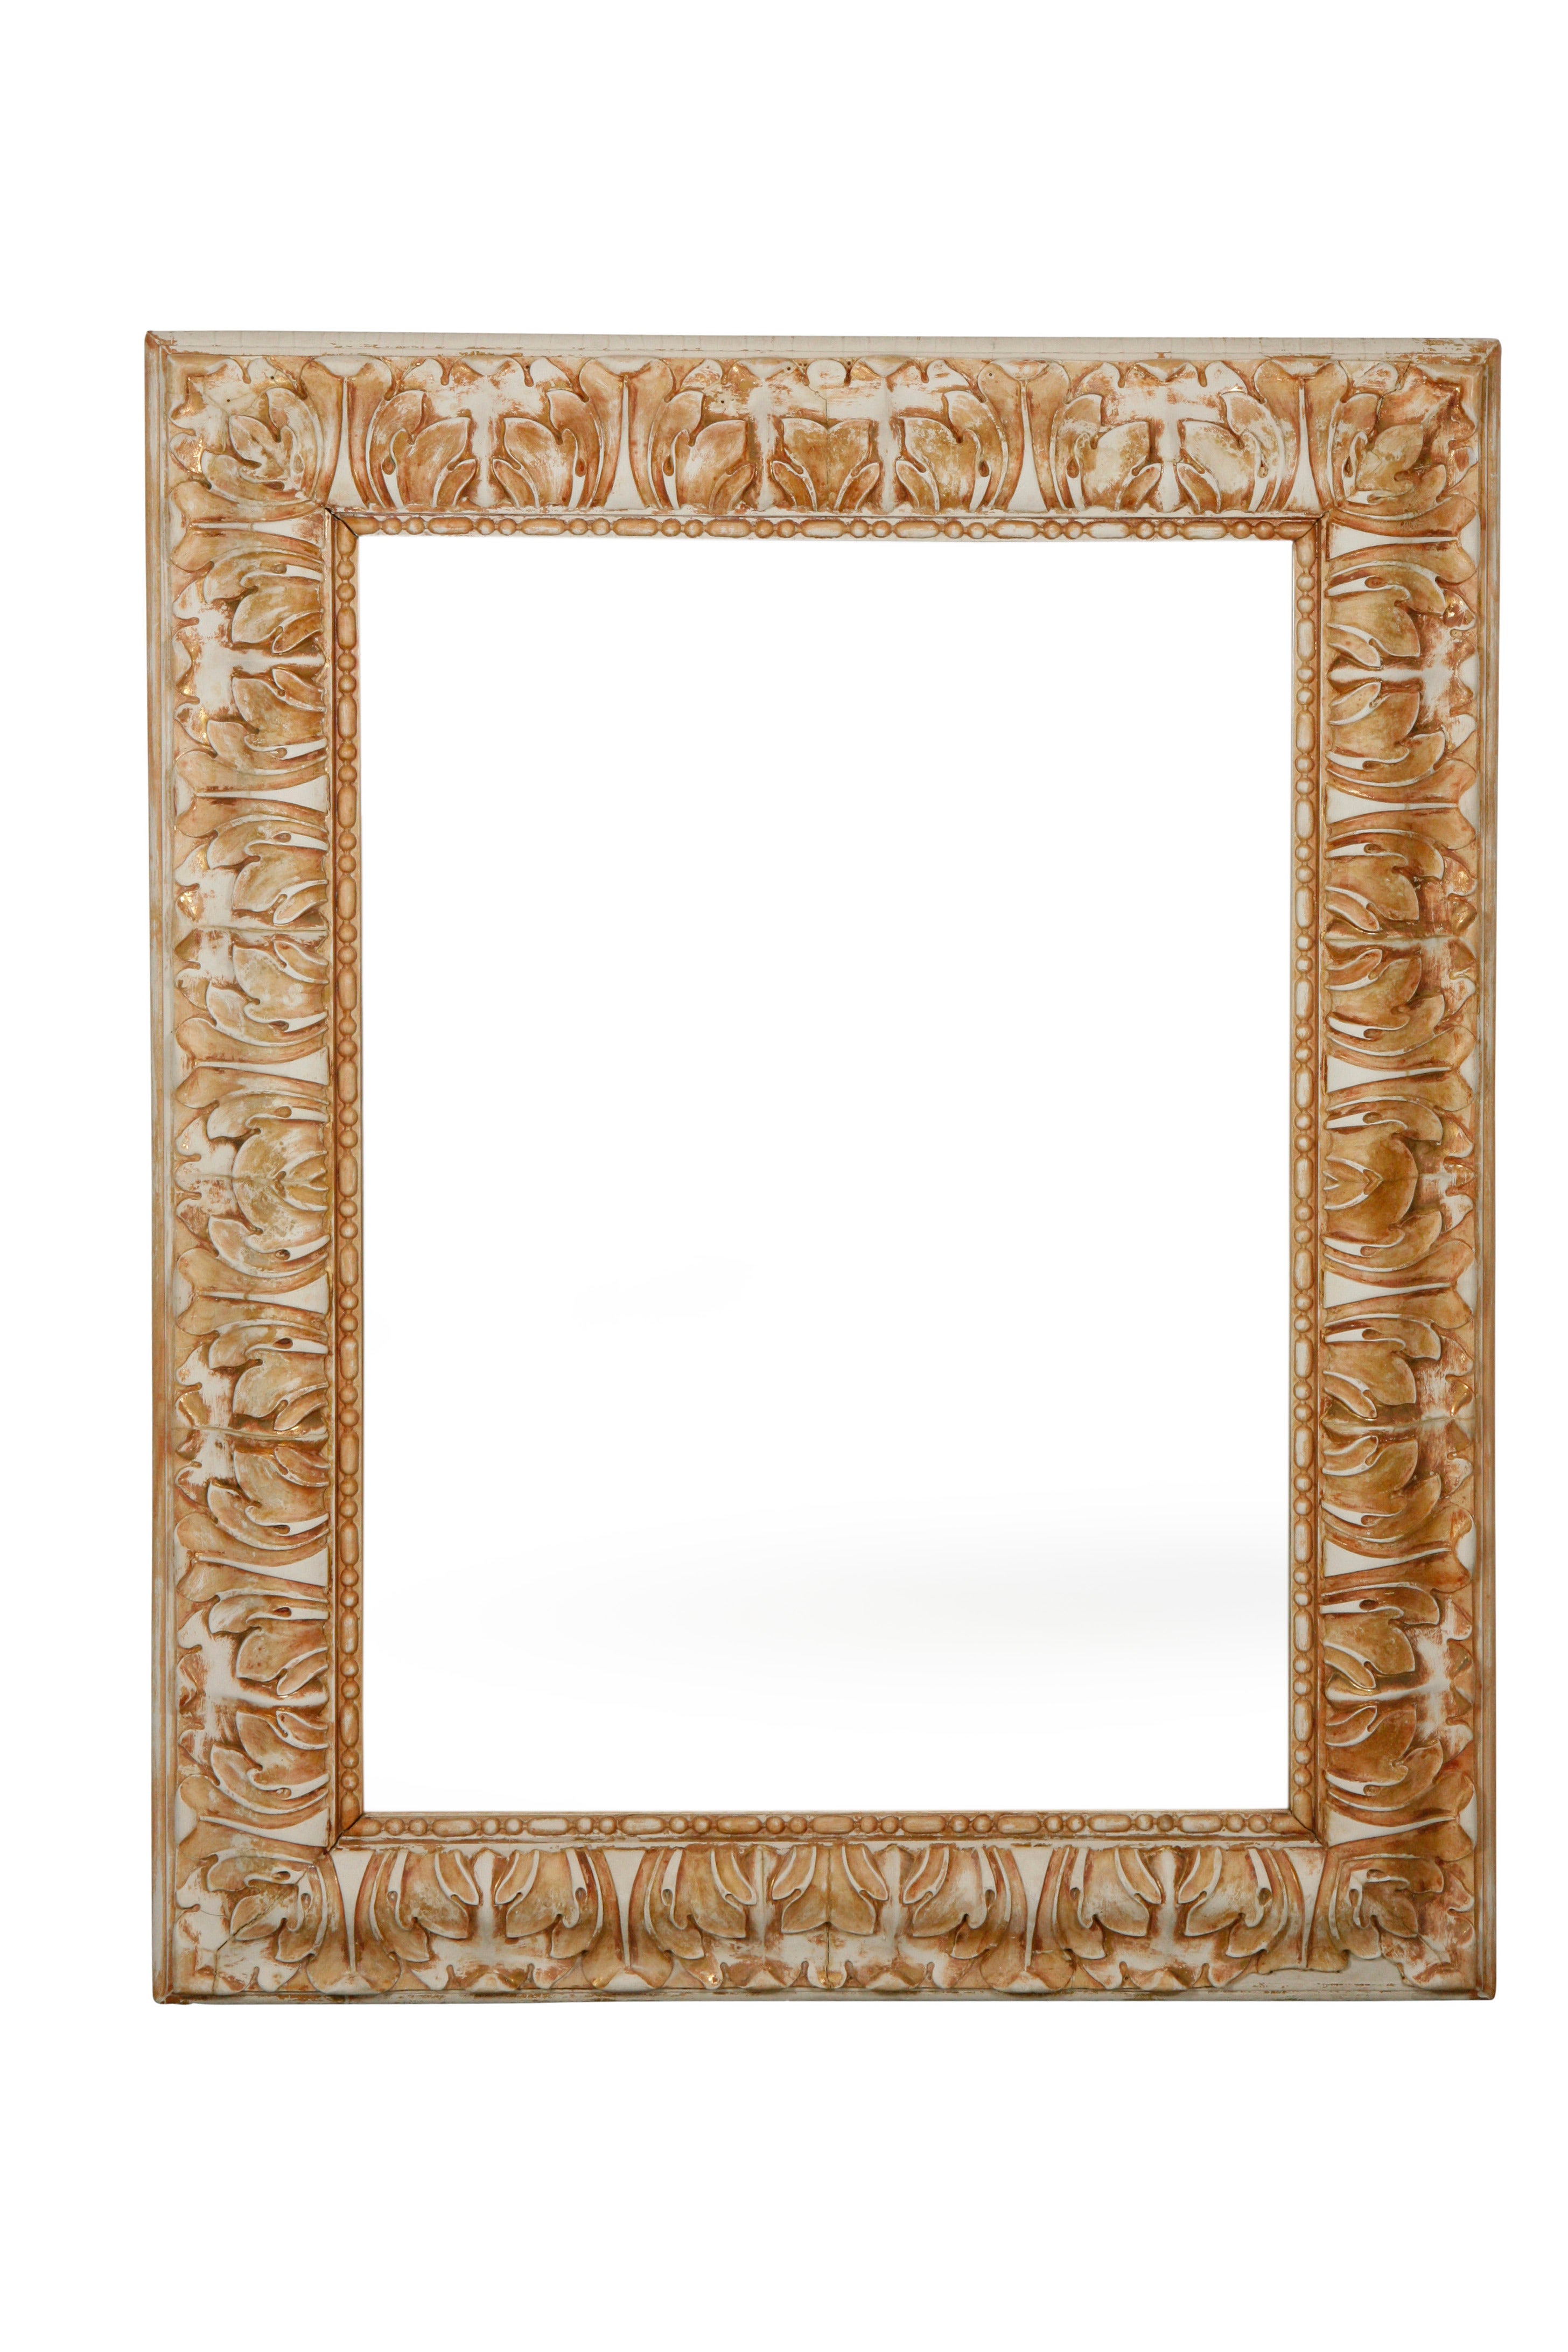 Napoleon III Gesso and Wood Mirror For Sale